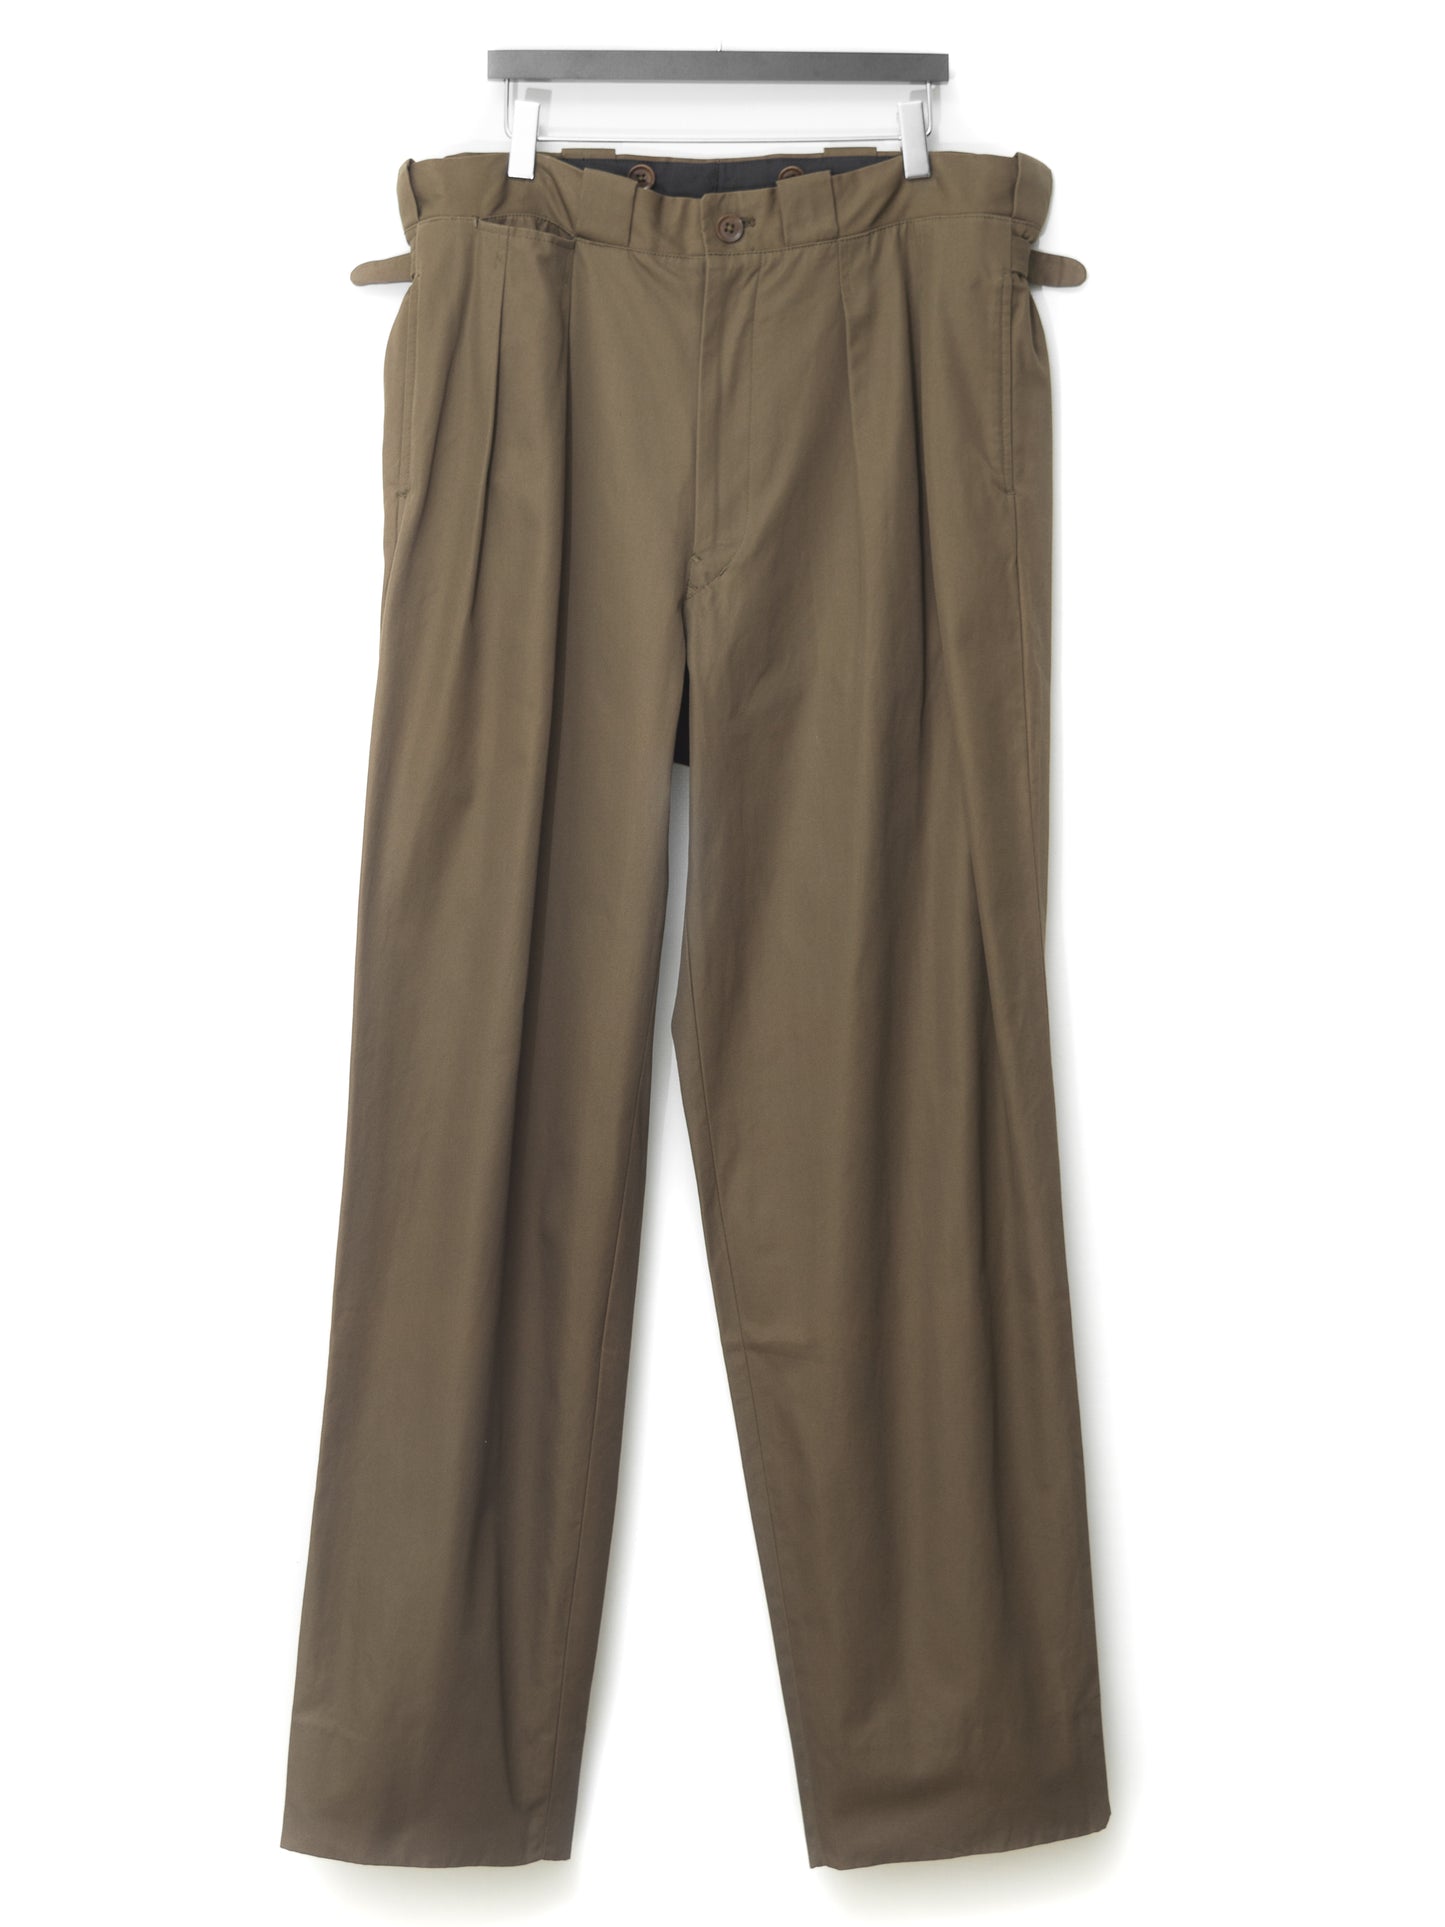 military trousers coyote ∙ cotton ∙ medium